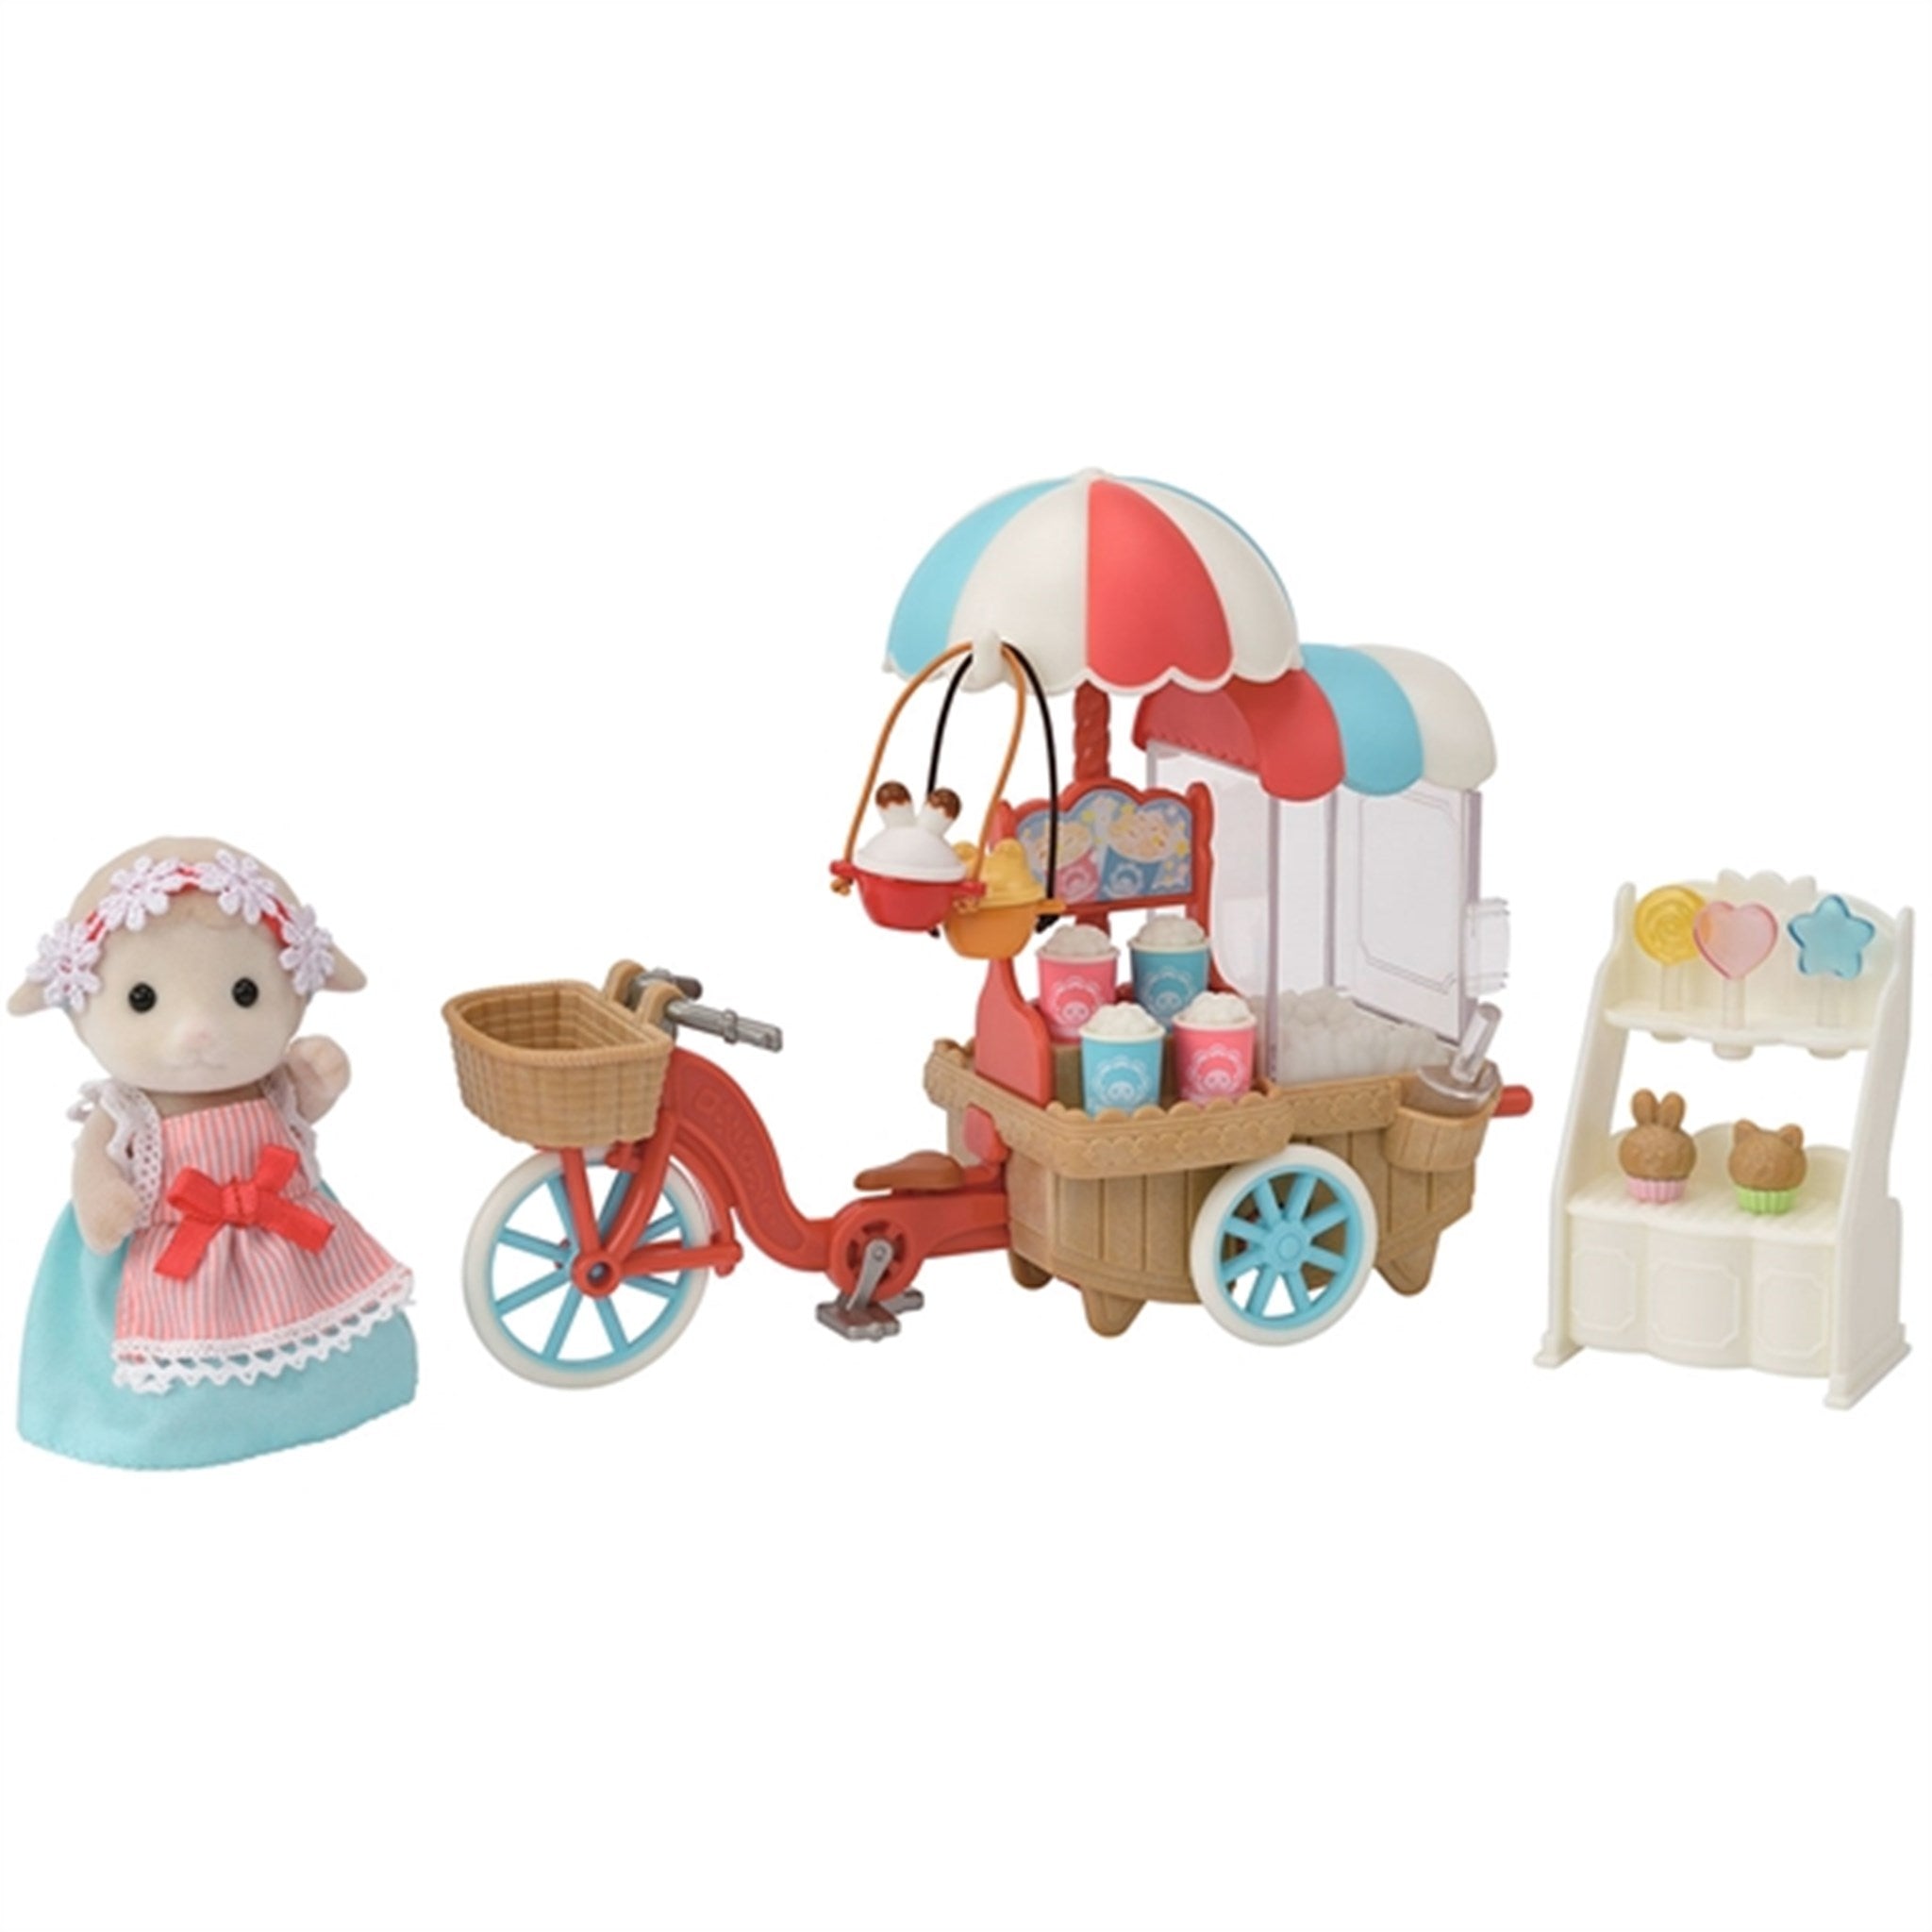 Sylvanian Families Popcorn Delivery Service With Figur 5